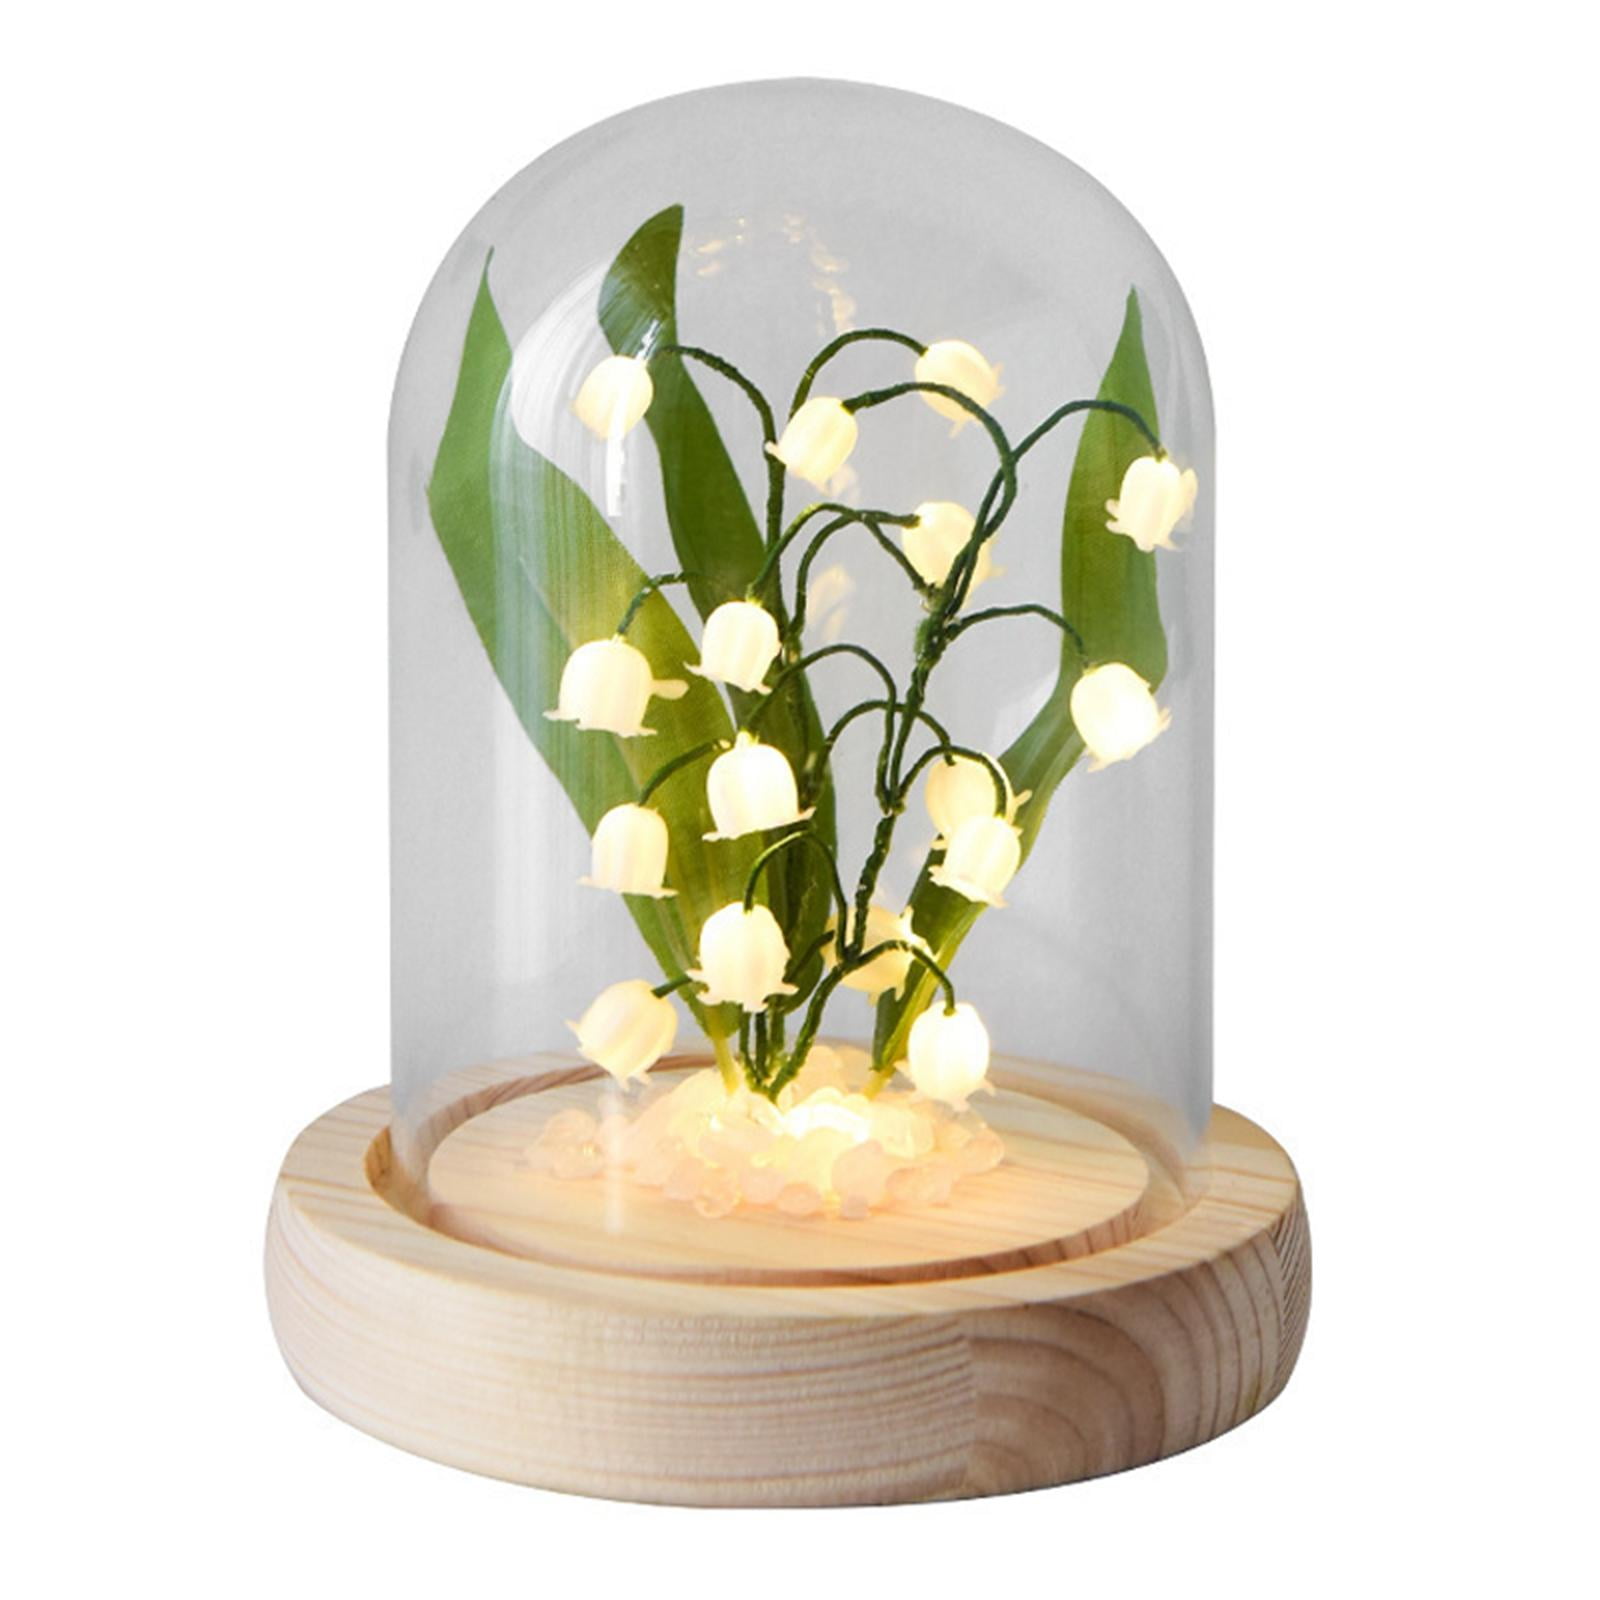 Garden Flowers Photo Night Light. Lily Of The Valley. Free Extra